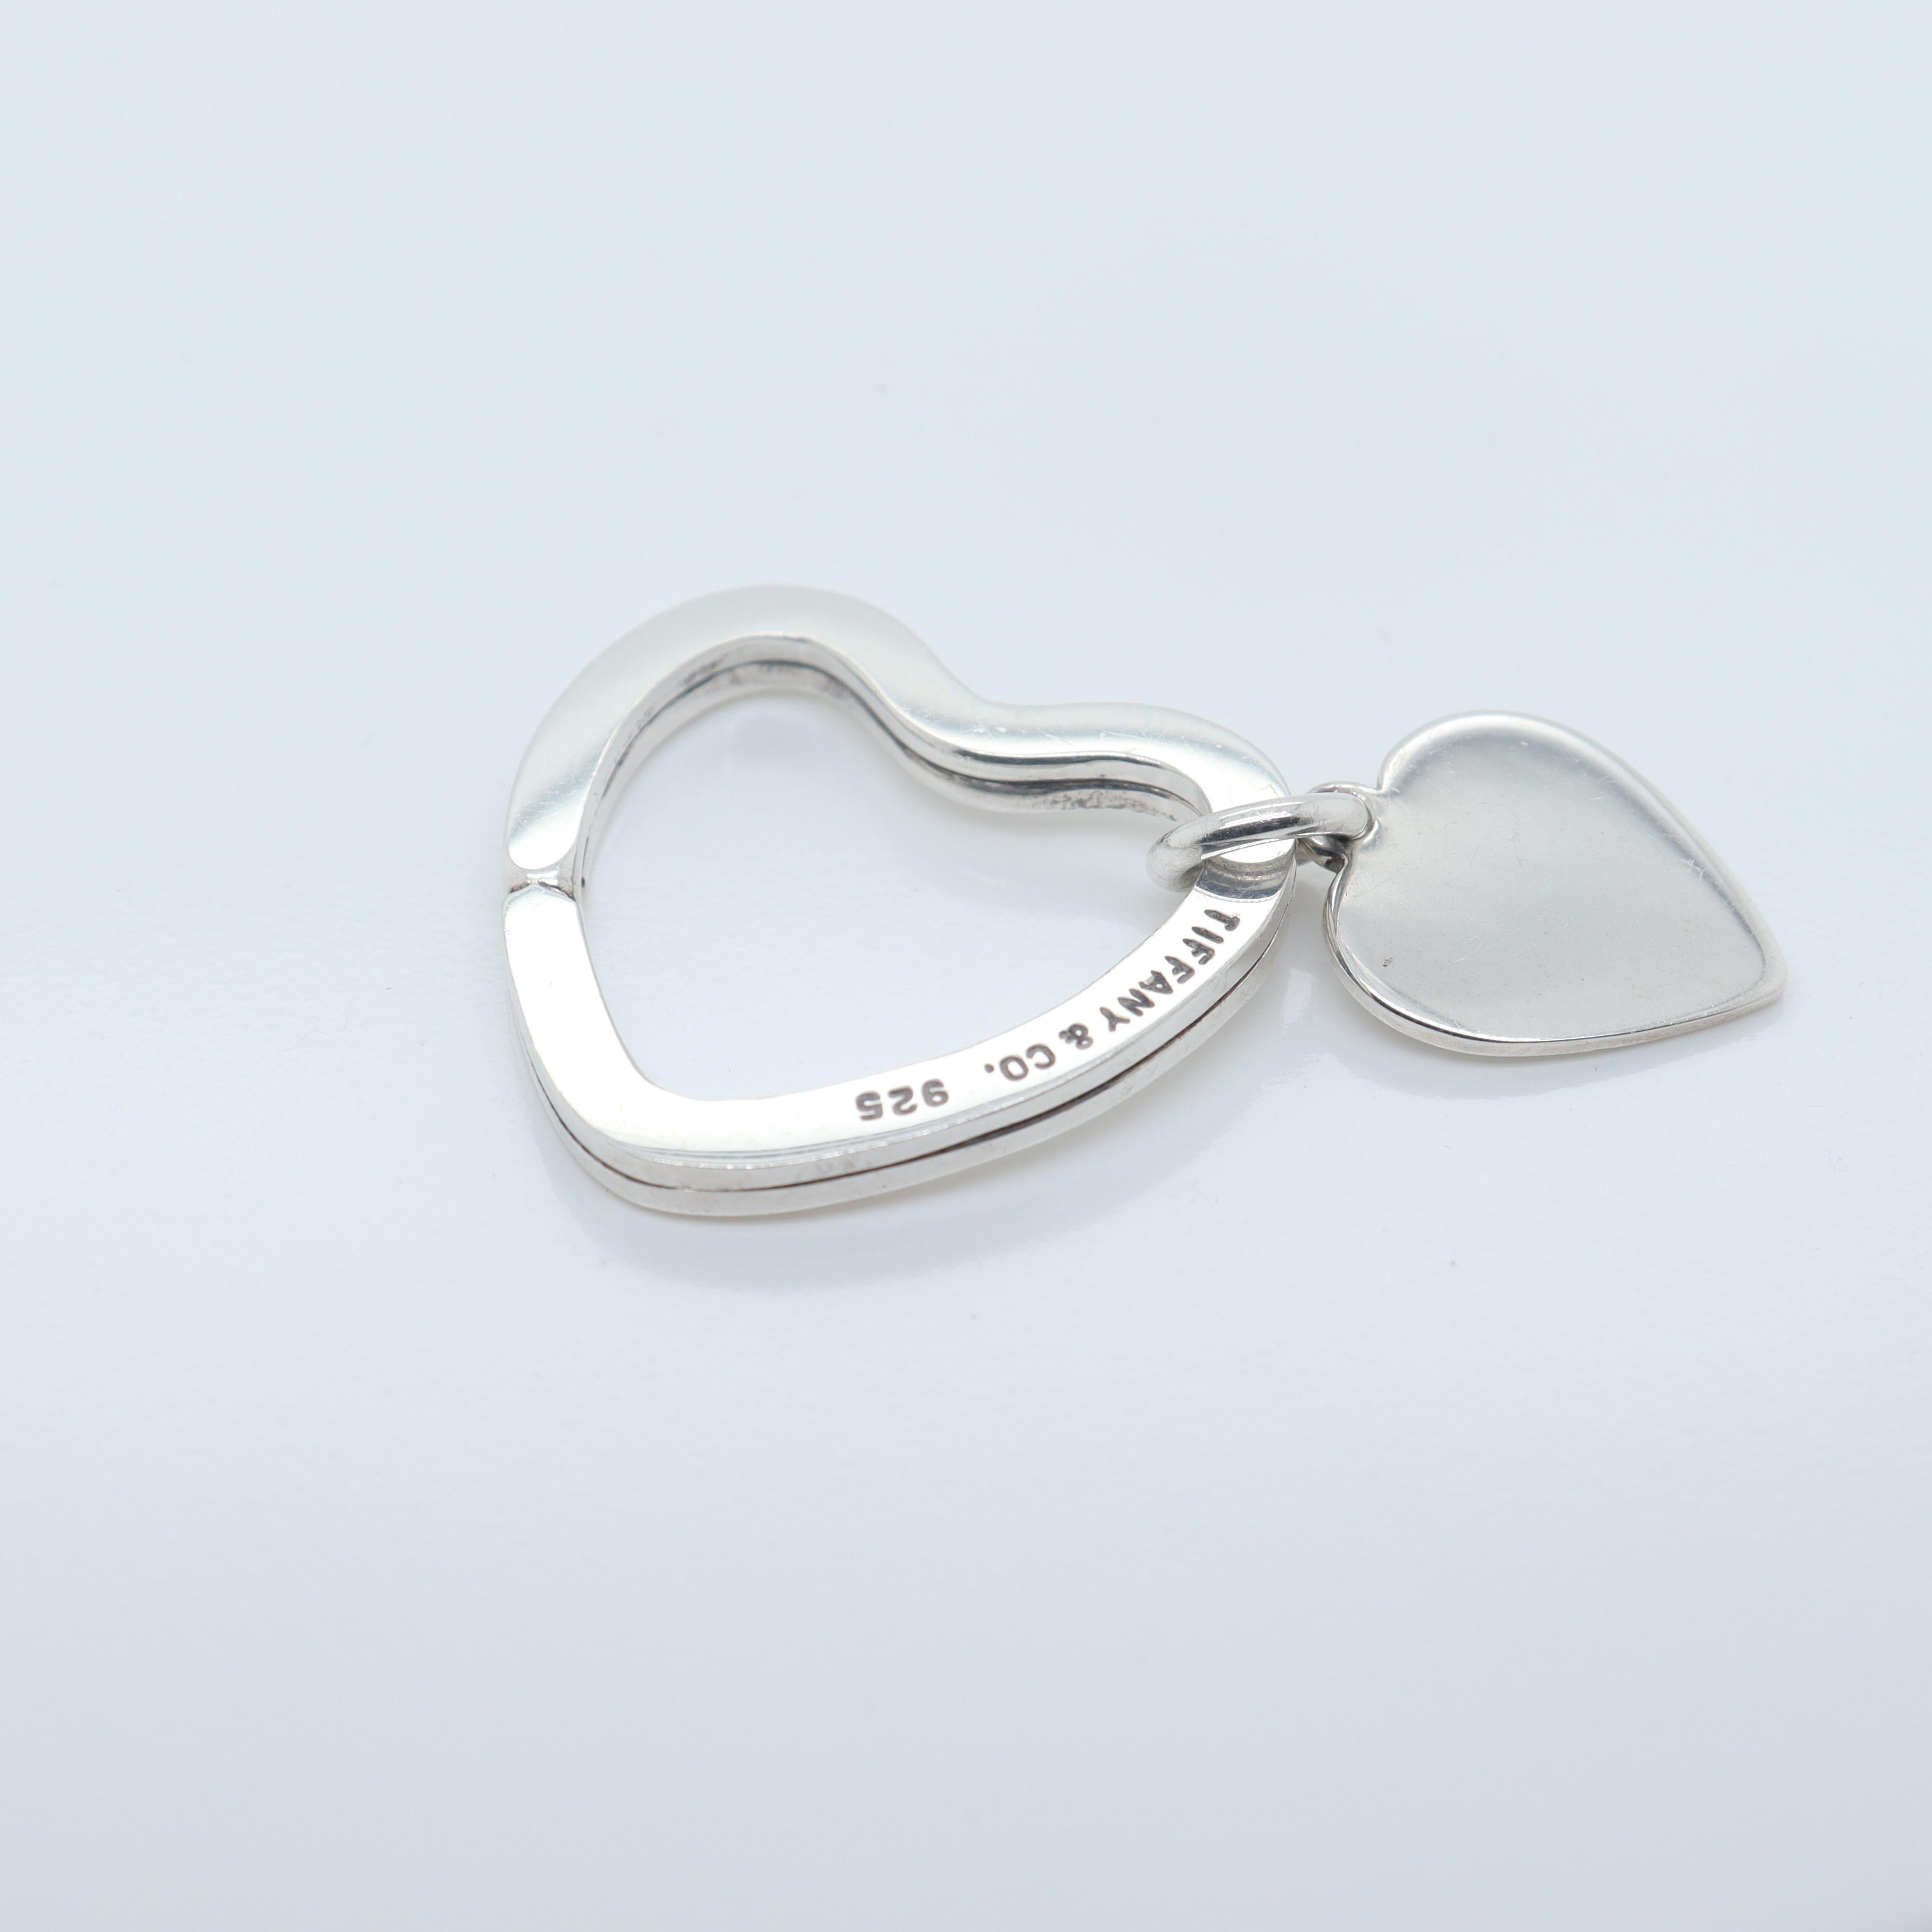 A fine silver heart shaped key holder or ring.

By Tiffany & Co.

In sterling silver.

With a heart pendant or charm attached to the ring.

Simply a wonderful key holder or key ring from Tiffany!

Date:
20th Century

Overall Condition:
It is in